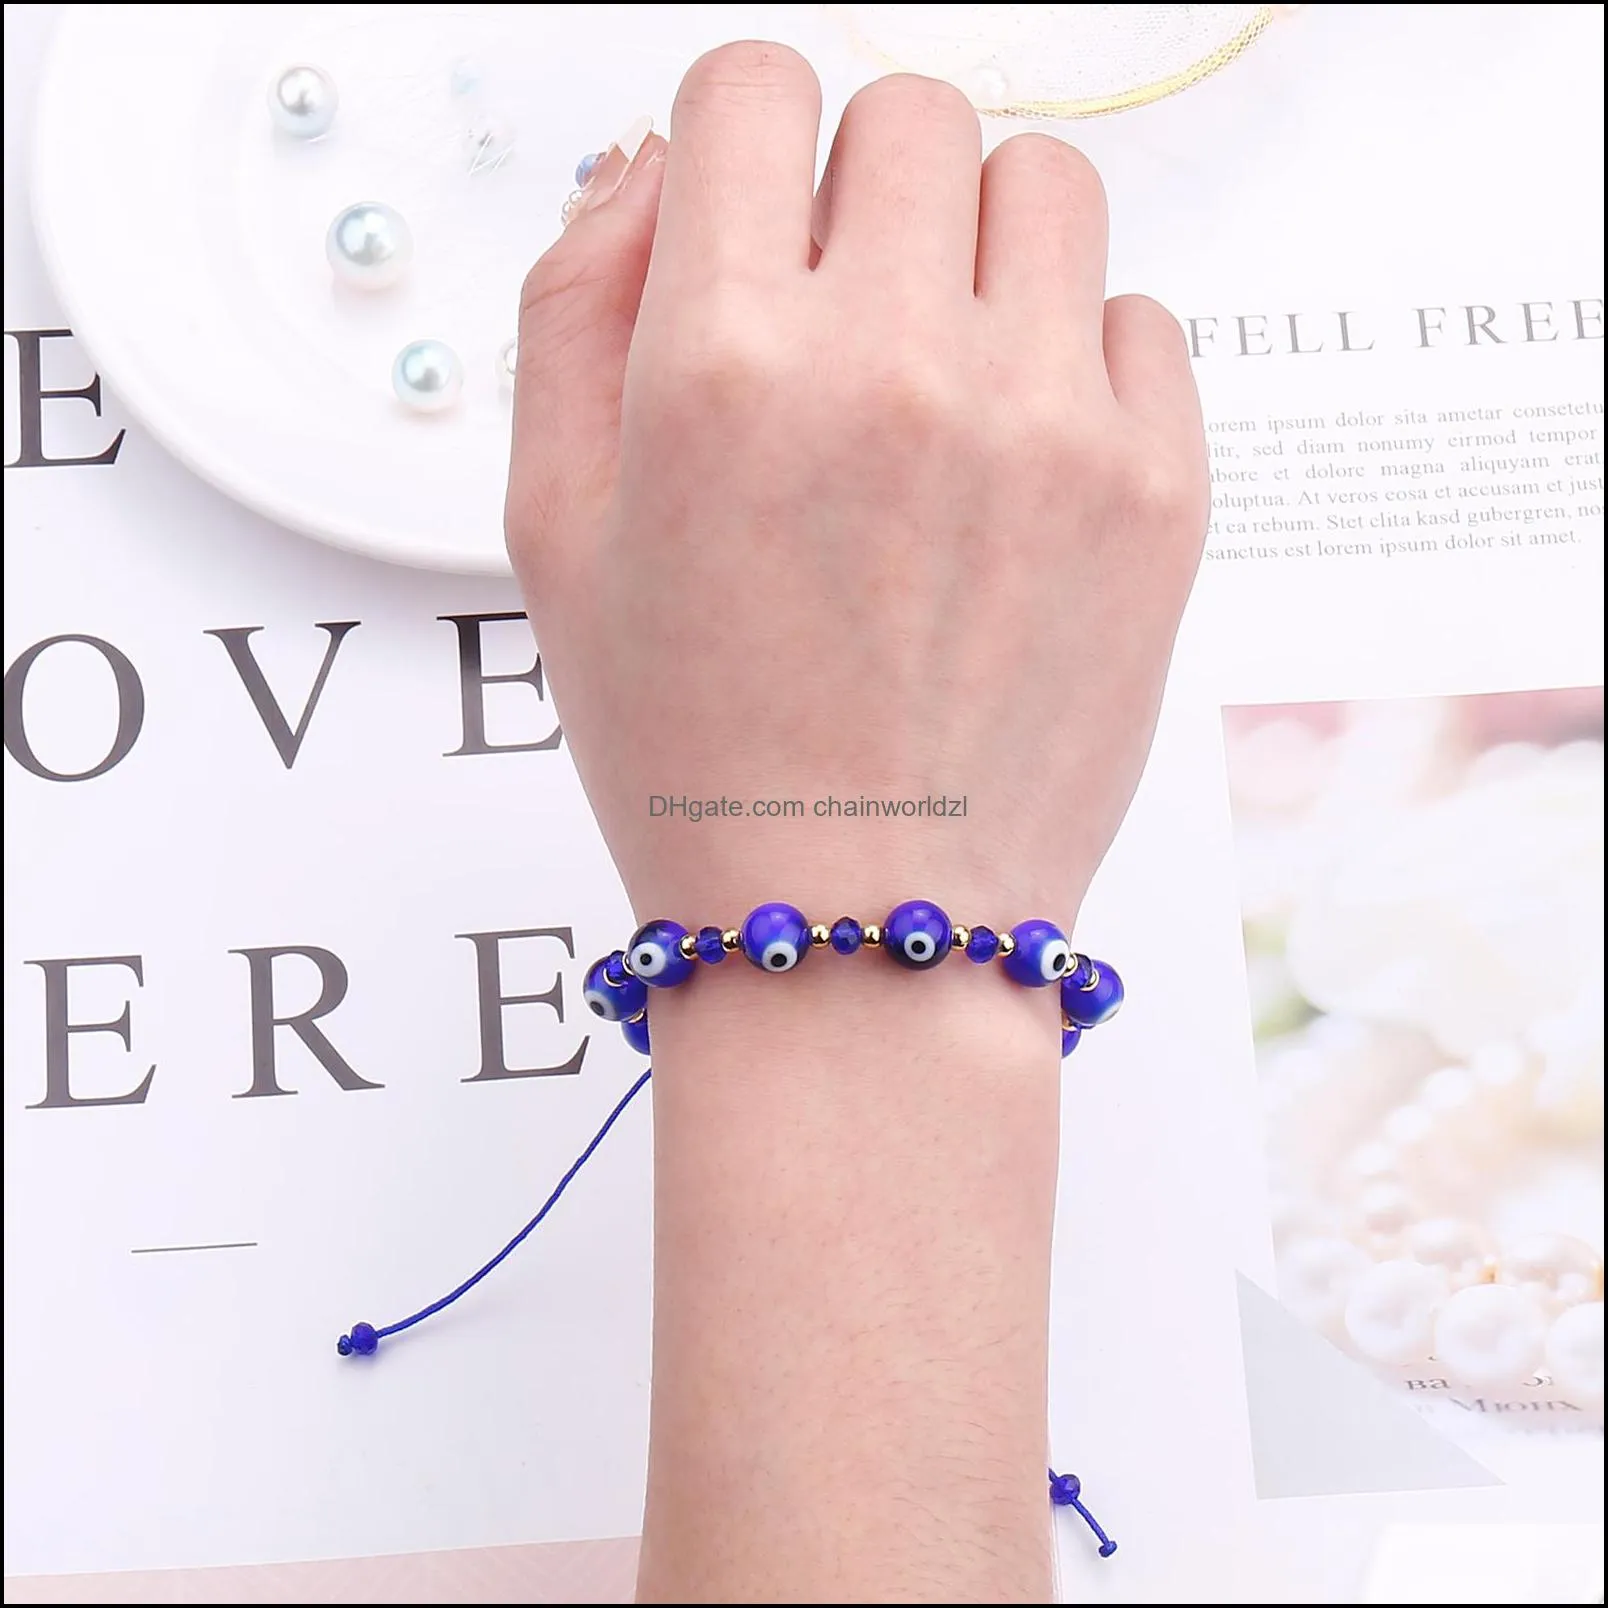 Turkish Evil Blue Eye Beads Bracelet Braided Rope Chain Colorful Crystal Beads Bracelets for Women Handmade Jewelry Gifts